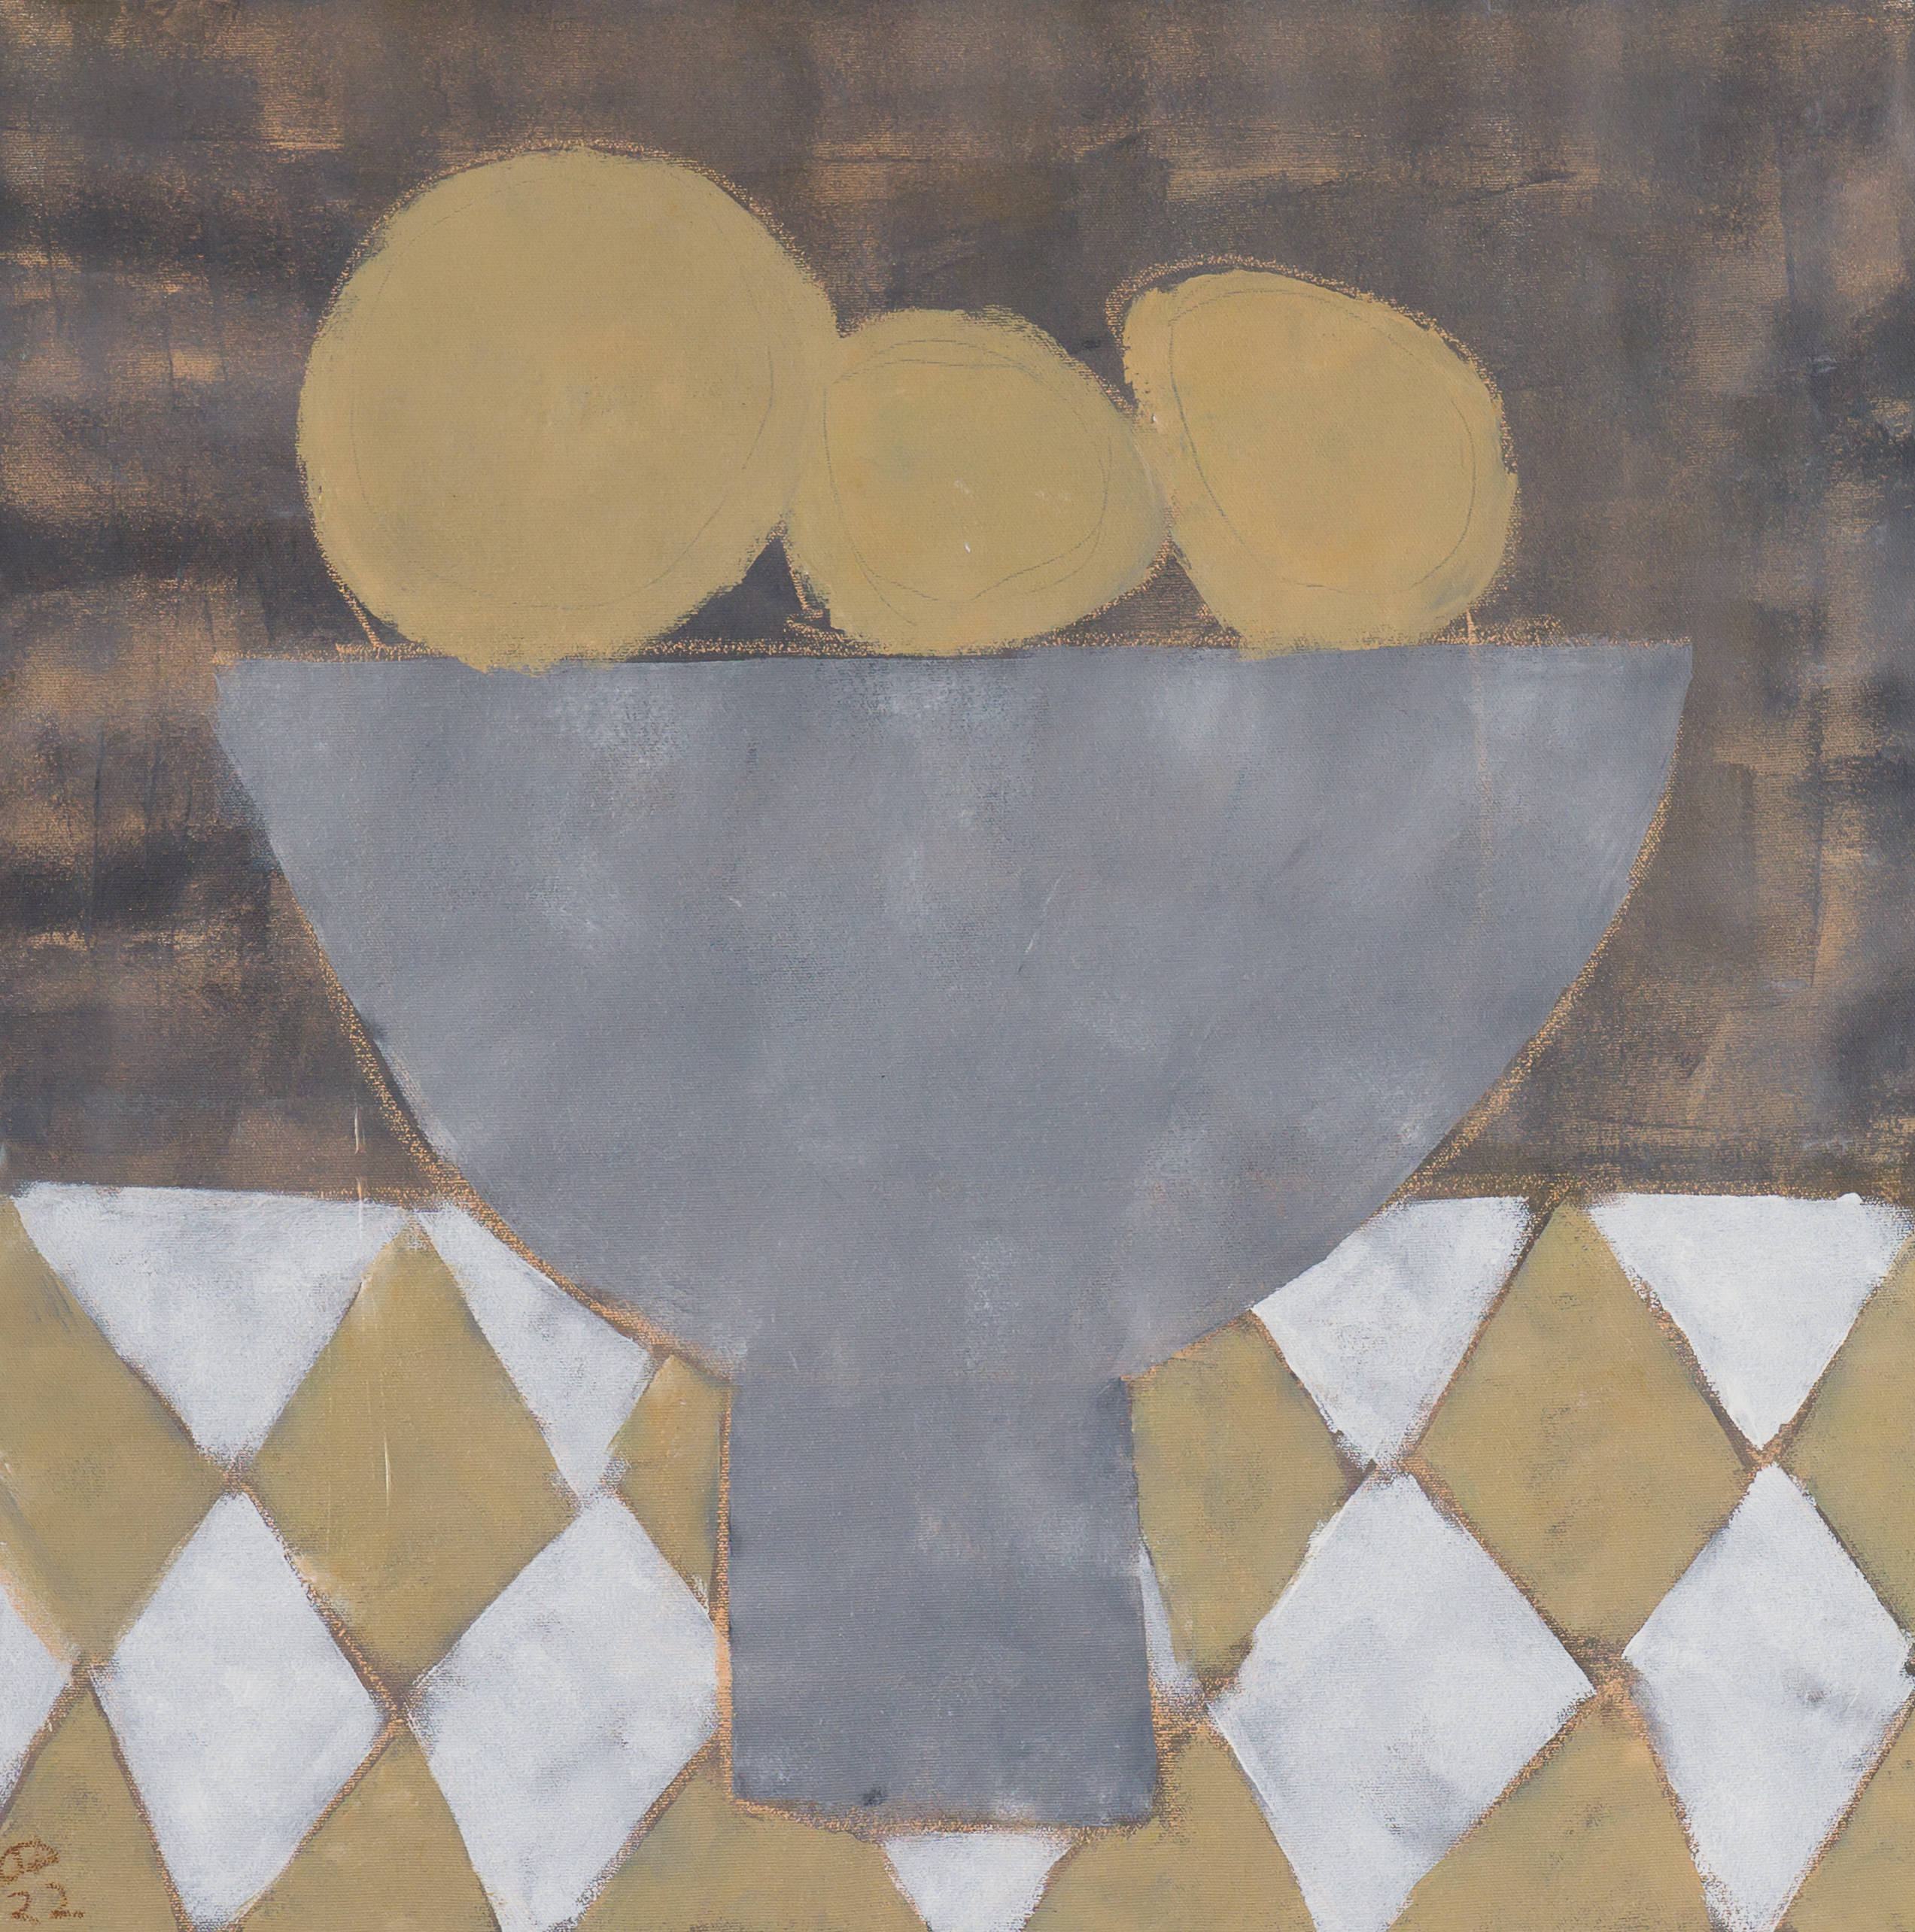 A painting of a bowl of fruit on a checked table cloth.